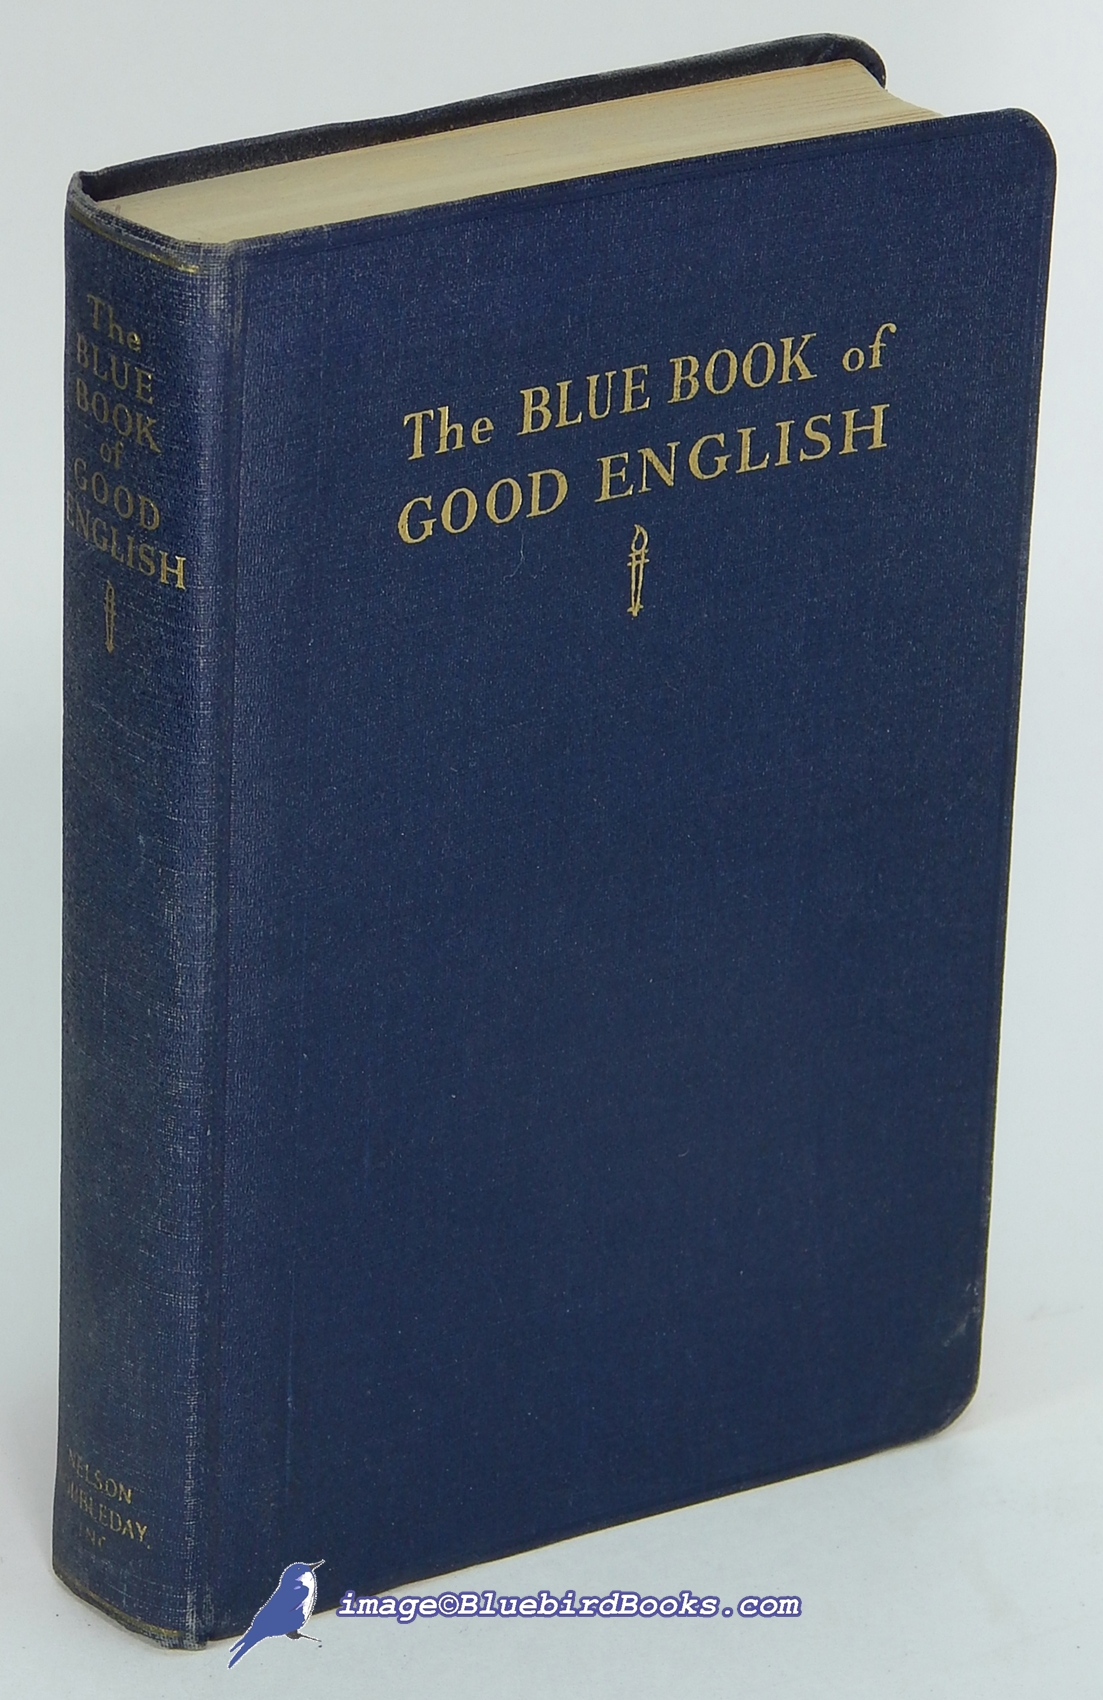 WOODS, GEORGE B.; STRATTON, CLARENCE - The Blue Book of Good English